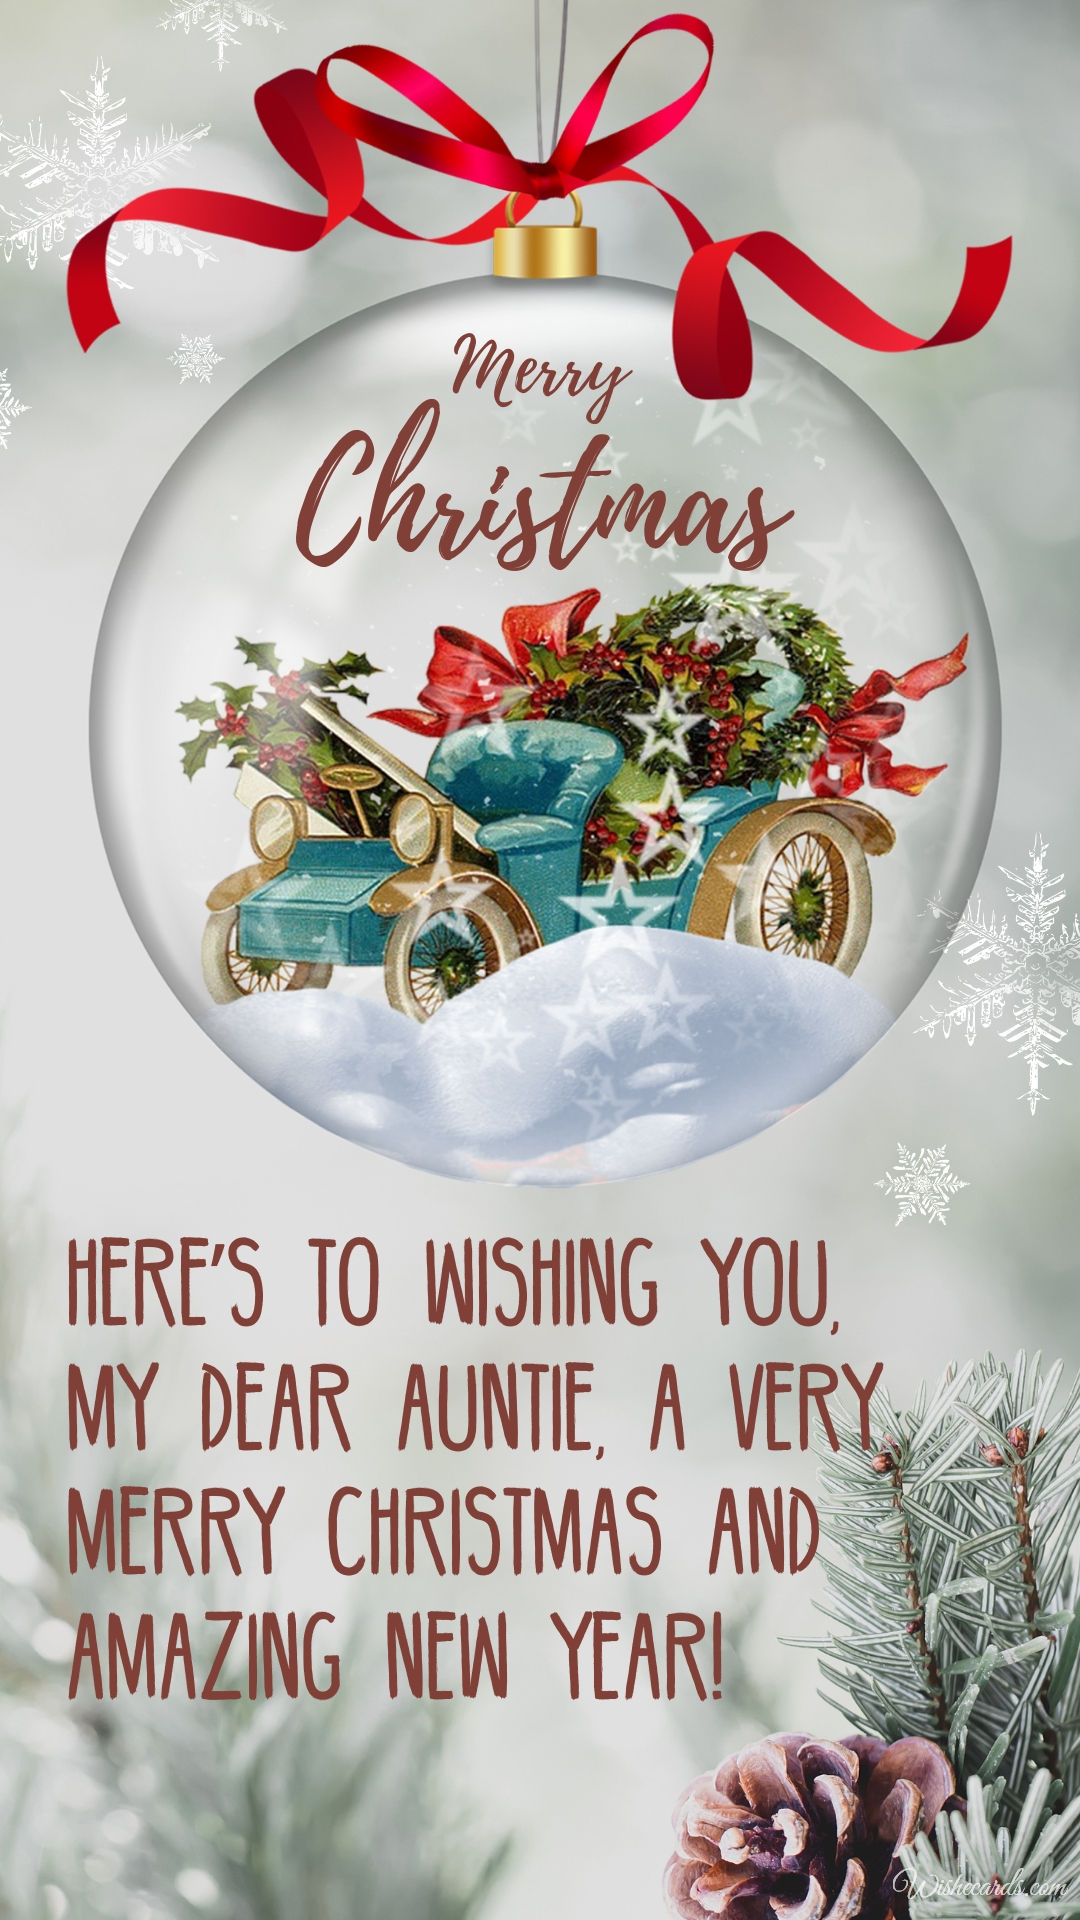 Merry Christmas Aunt Image